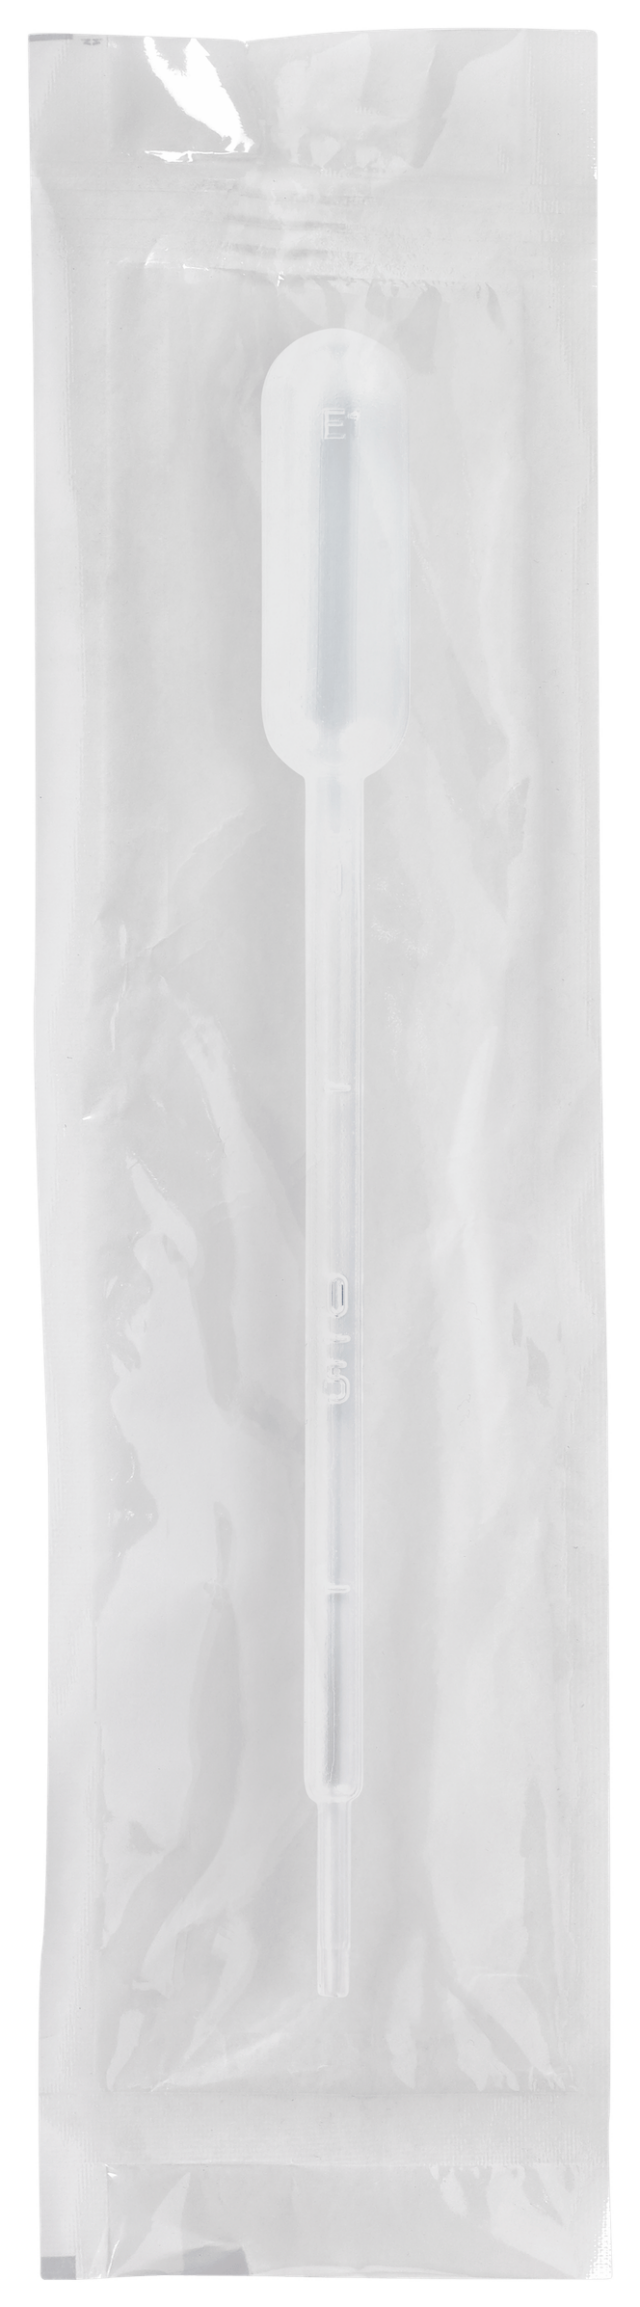 150mm Disposable Transfer Pipet Graduated up to 1 mL at 0.25 mL Intervals with 3.5 mL Bulb Draw and 23 drops/mL - Individually Wrapped, Sterile